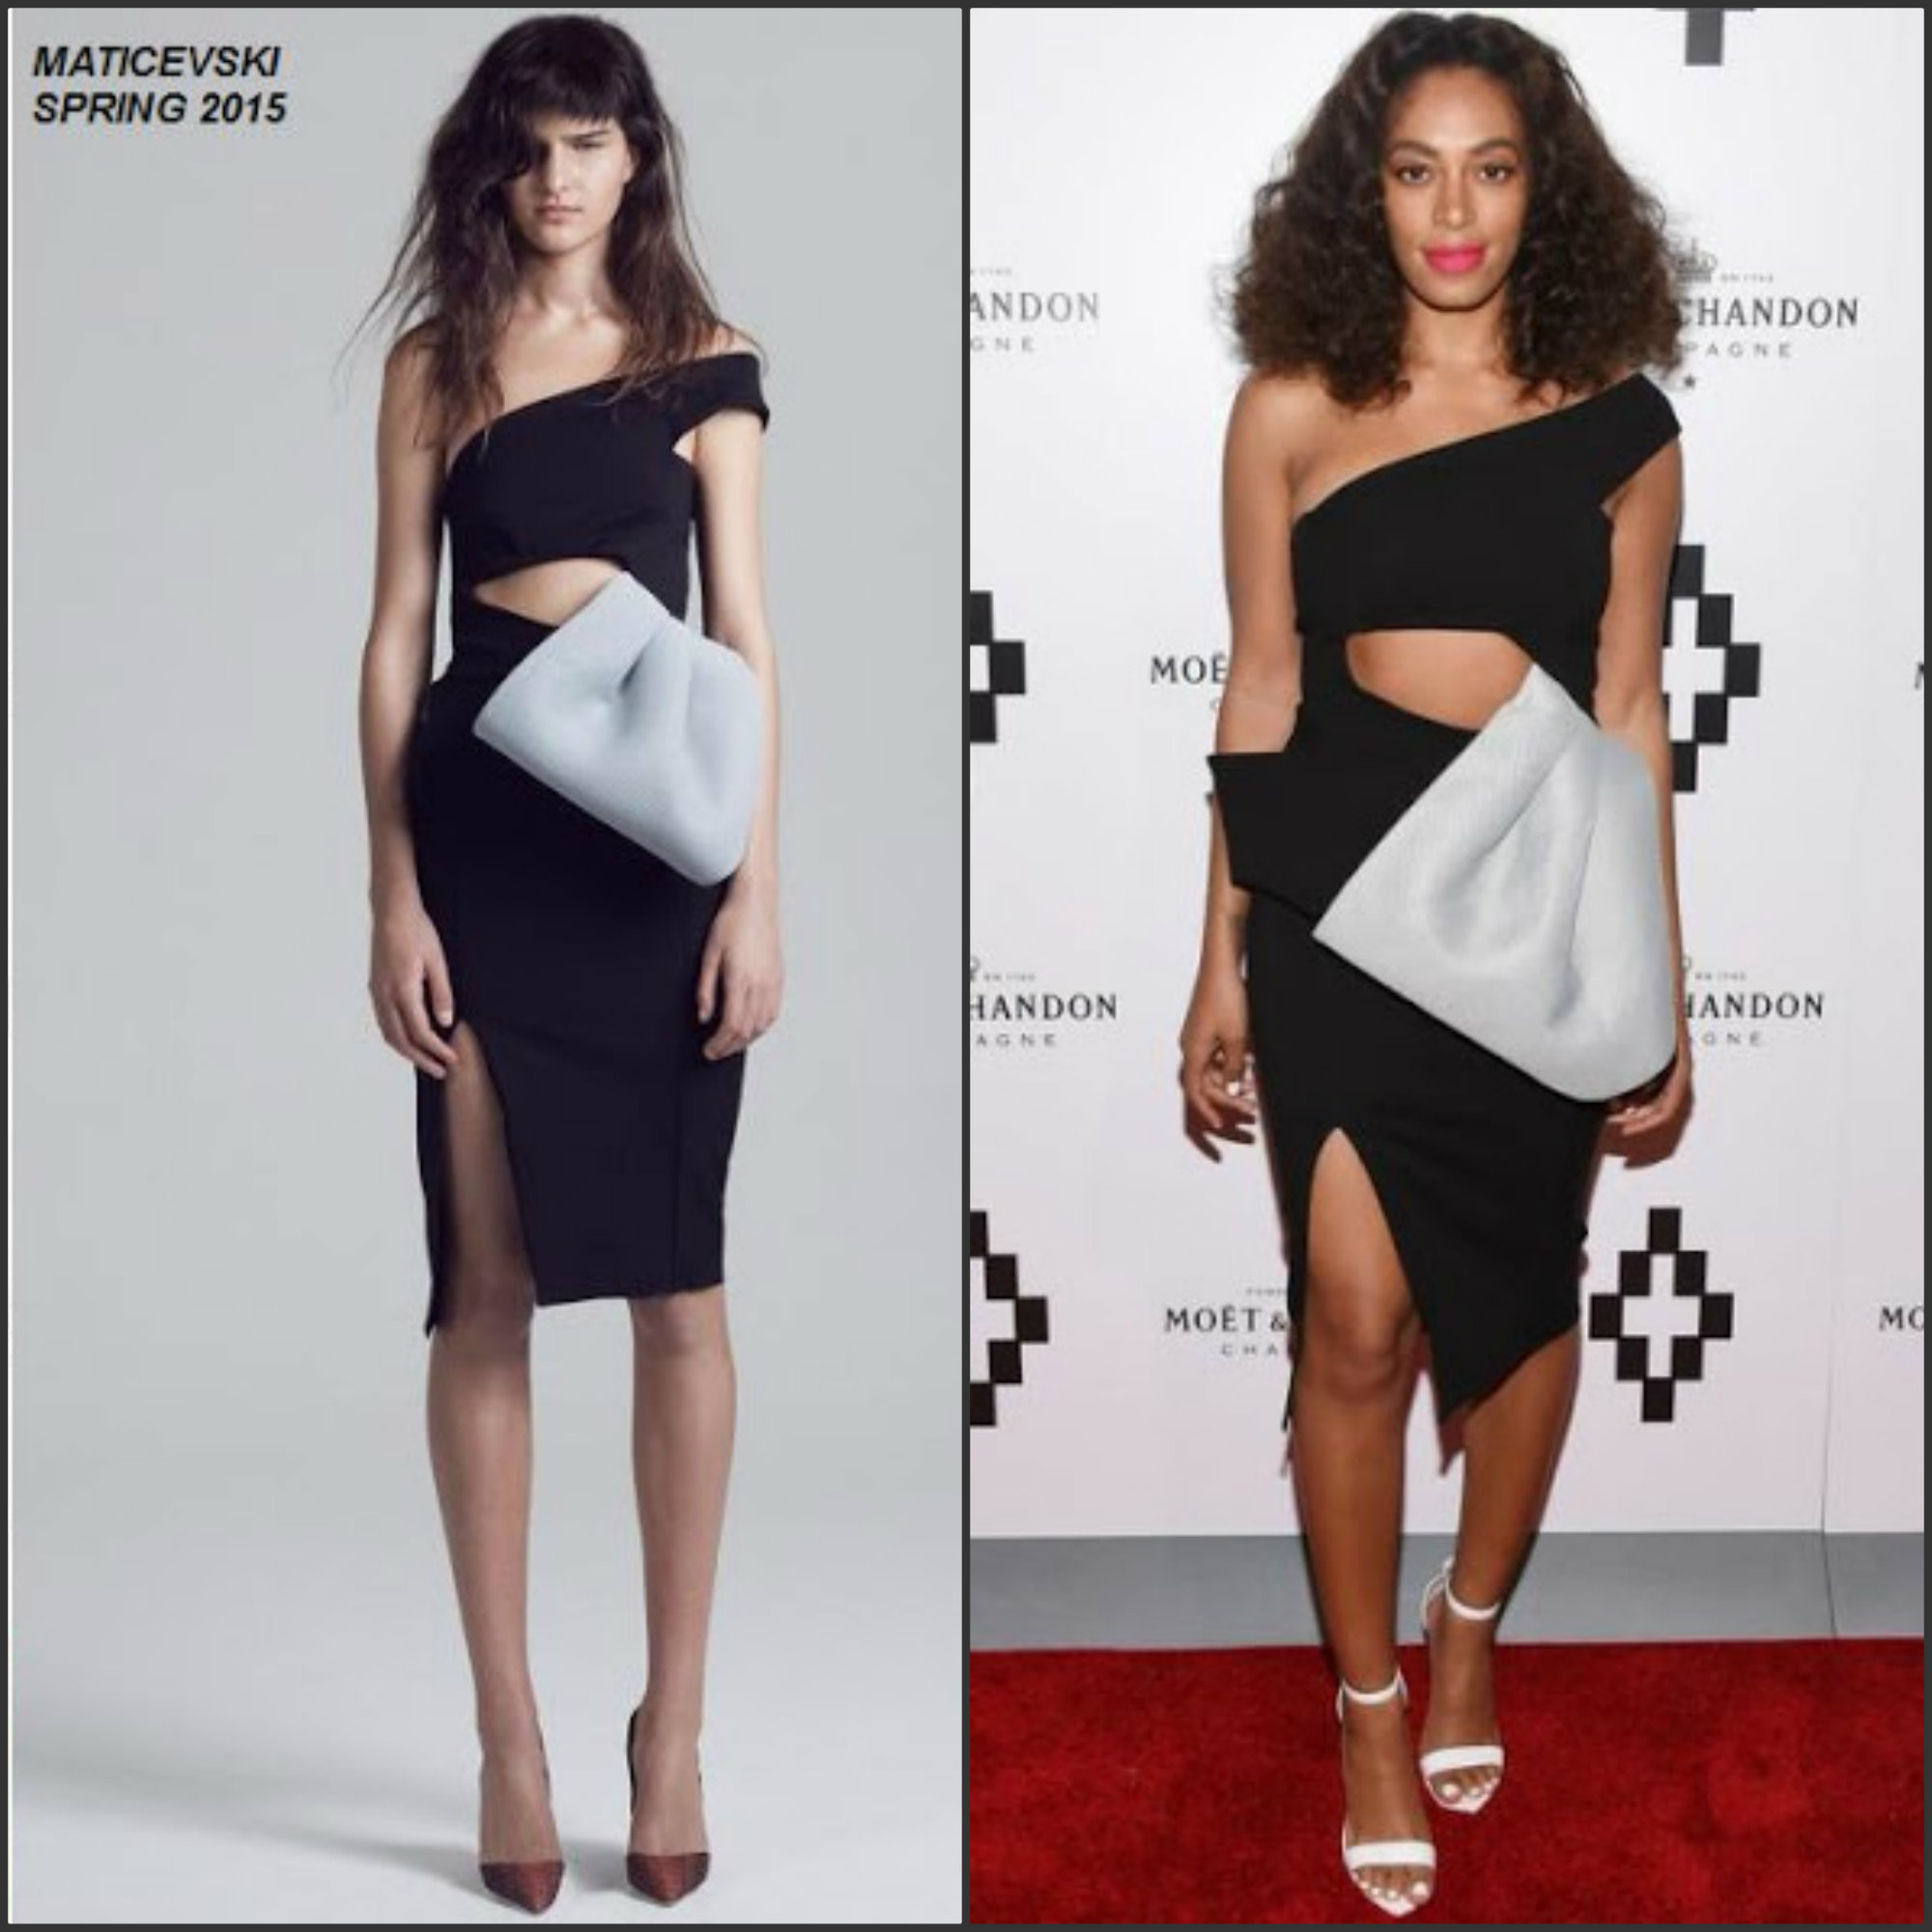 SOLANGE-KNOWLES-in-maticevski-moet-nectar-imperial-rose-x-marcelo-burton-launch-event